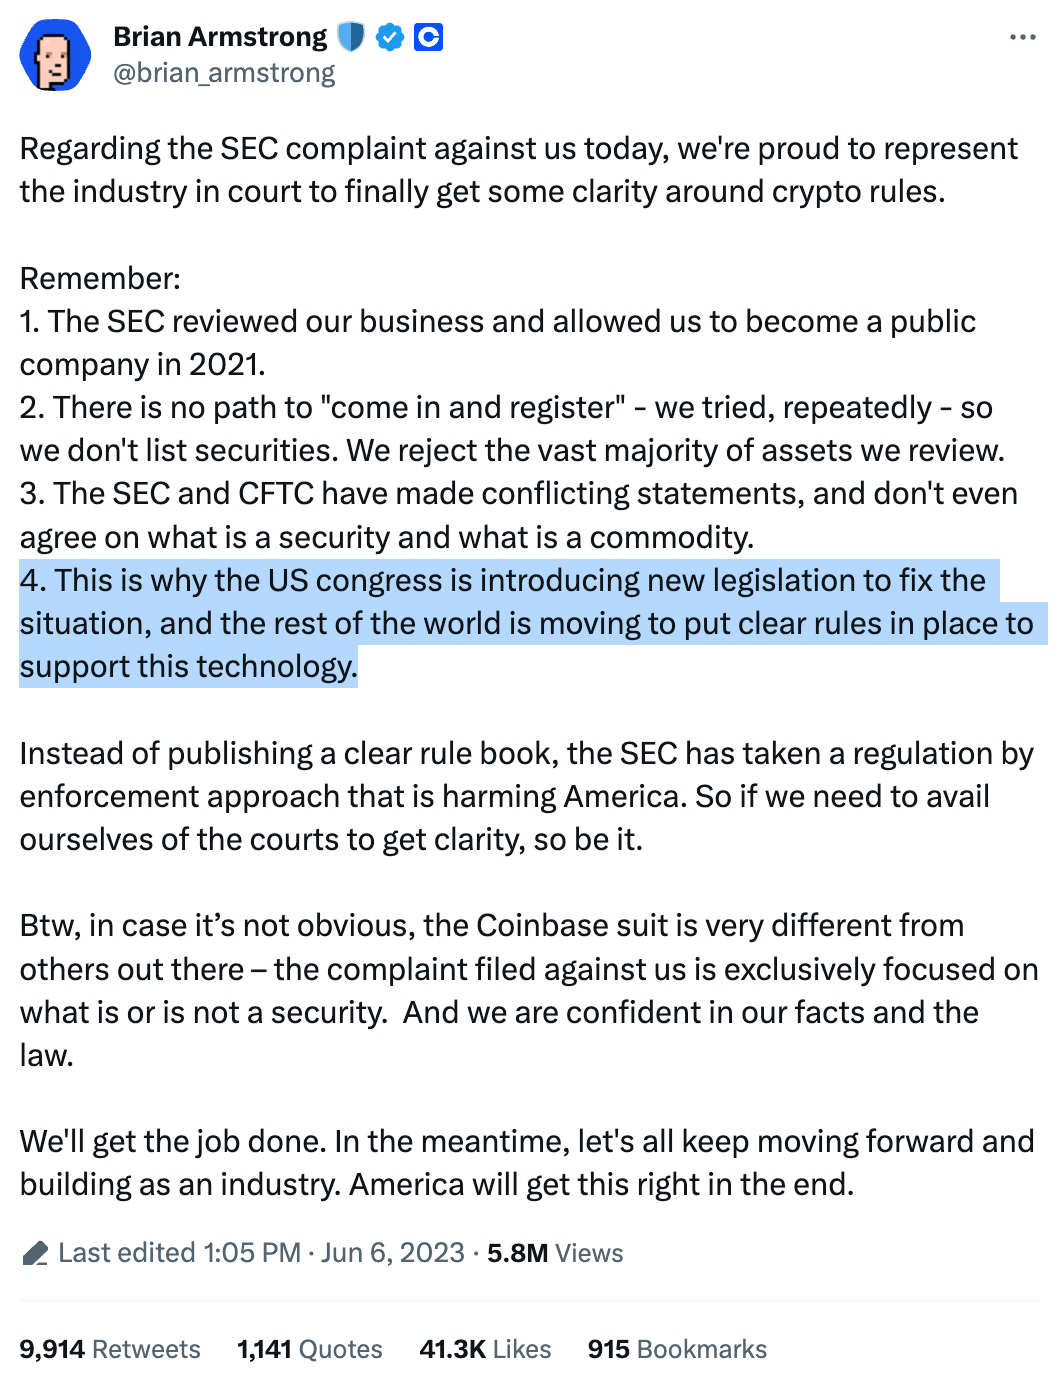 Brian Armstrong @brian_armstrong Regarding the SEC complaint against us today, we're proud to represent the industry in court to finally get some clarity around crypto rules.  Remember: 1. The SEC reviewed our business and allowed us to become a public company in 2021. 2. There is no path to "come in and register" - we tried, repeatedly - so we don't list securities. We reject the vast majority of assets we review. 3. The SEC and CFTC have made conflicting statements, and don't even agree on what is a security and what is a commodity. 4. This is why the US congress is introducing new legislation to fix the situation, and the rest of the world is moving to put clear rules in place to support this technology.  Instead of publishing a clear rule book, the SEC has taken a regulation by enforcement approach that is harming America. So if we need to avail ourselves of the courts to get clarity, so be it.  Btw, in case it's not obvious, the Coinbase suit is very different from others out there – the complaint filed against us is exclusively focused on what is or is not a security.  And we are confident in our facts and the law.  We'll get the job done. In the meantime, let's all keep moving forward and building as an industry. America will get this right in the end.